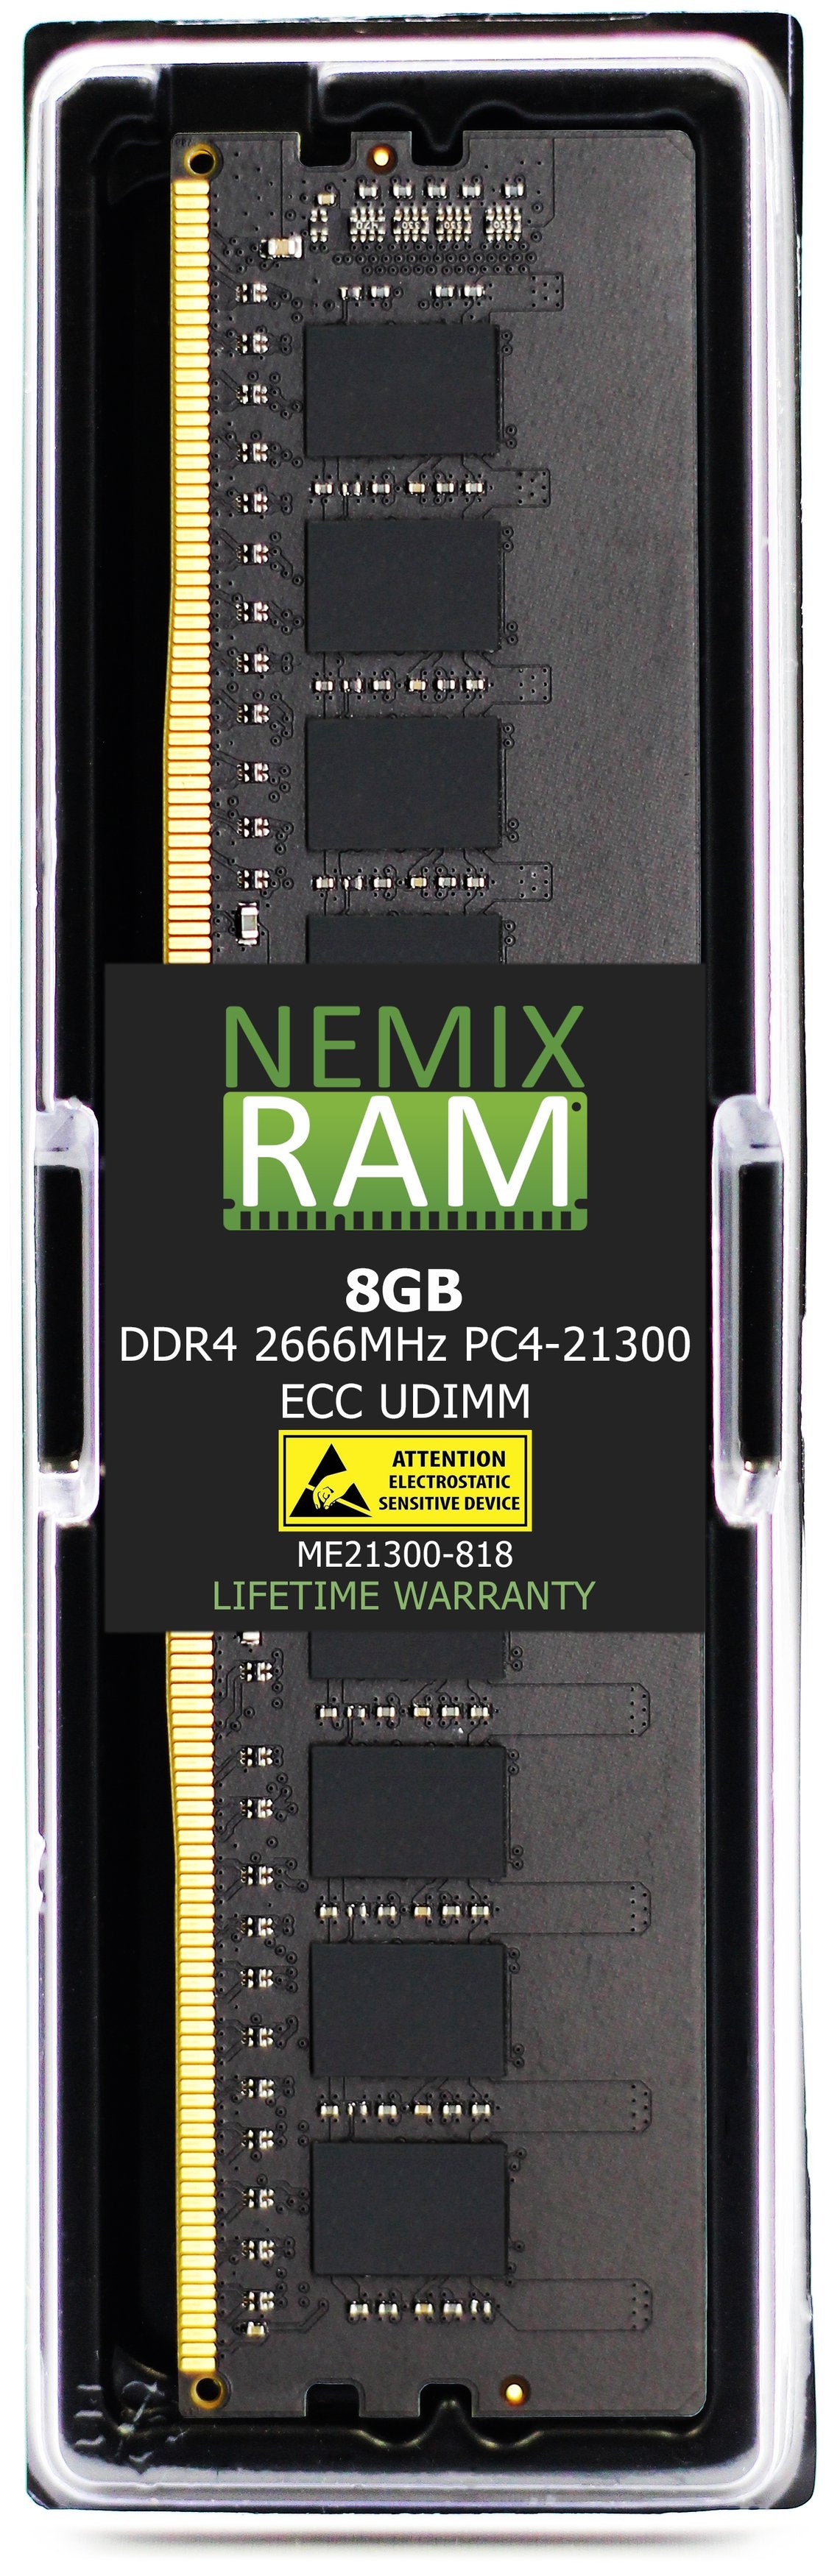 DDR4 2666MHZ PC4-21300 ECC UDIMM Compatible with Synology RackStation RS3618xs